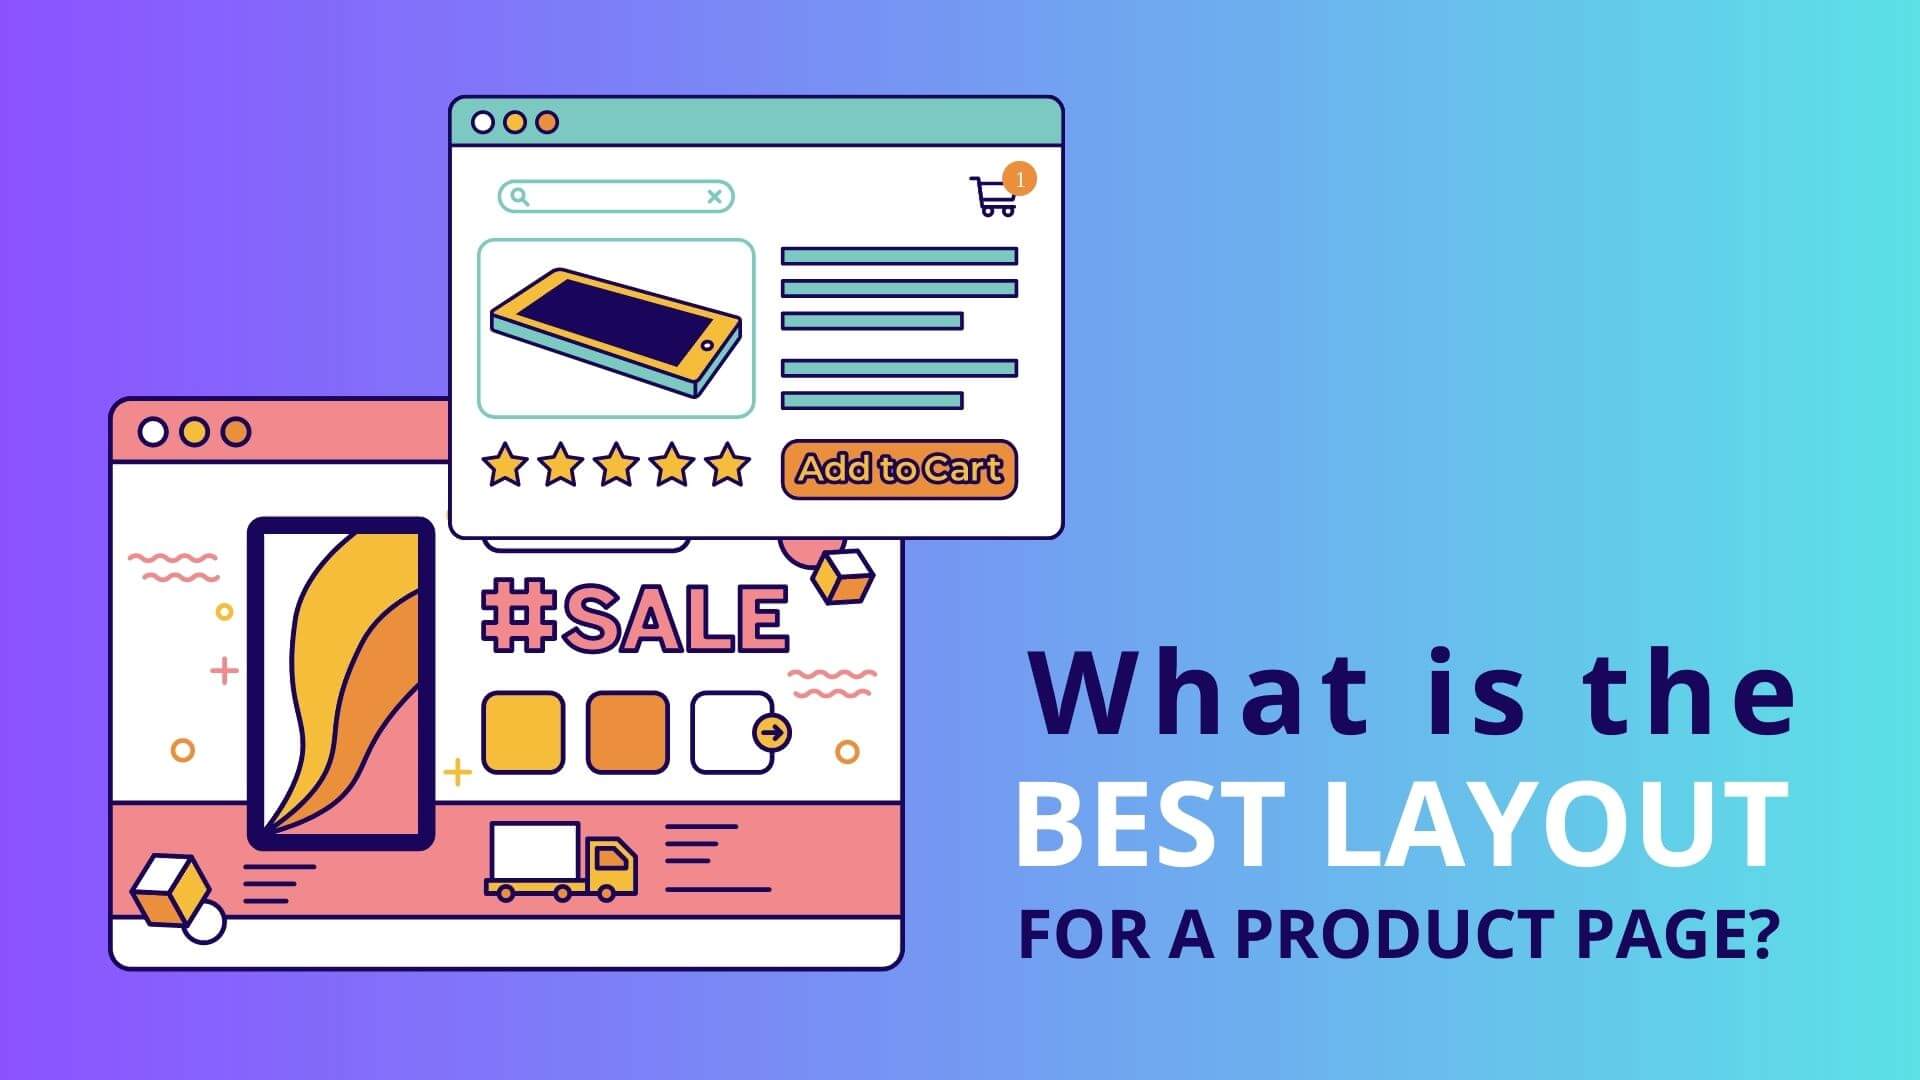 What is the best layout for a product page?